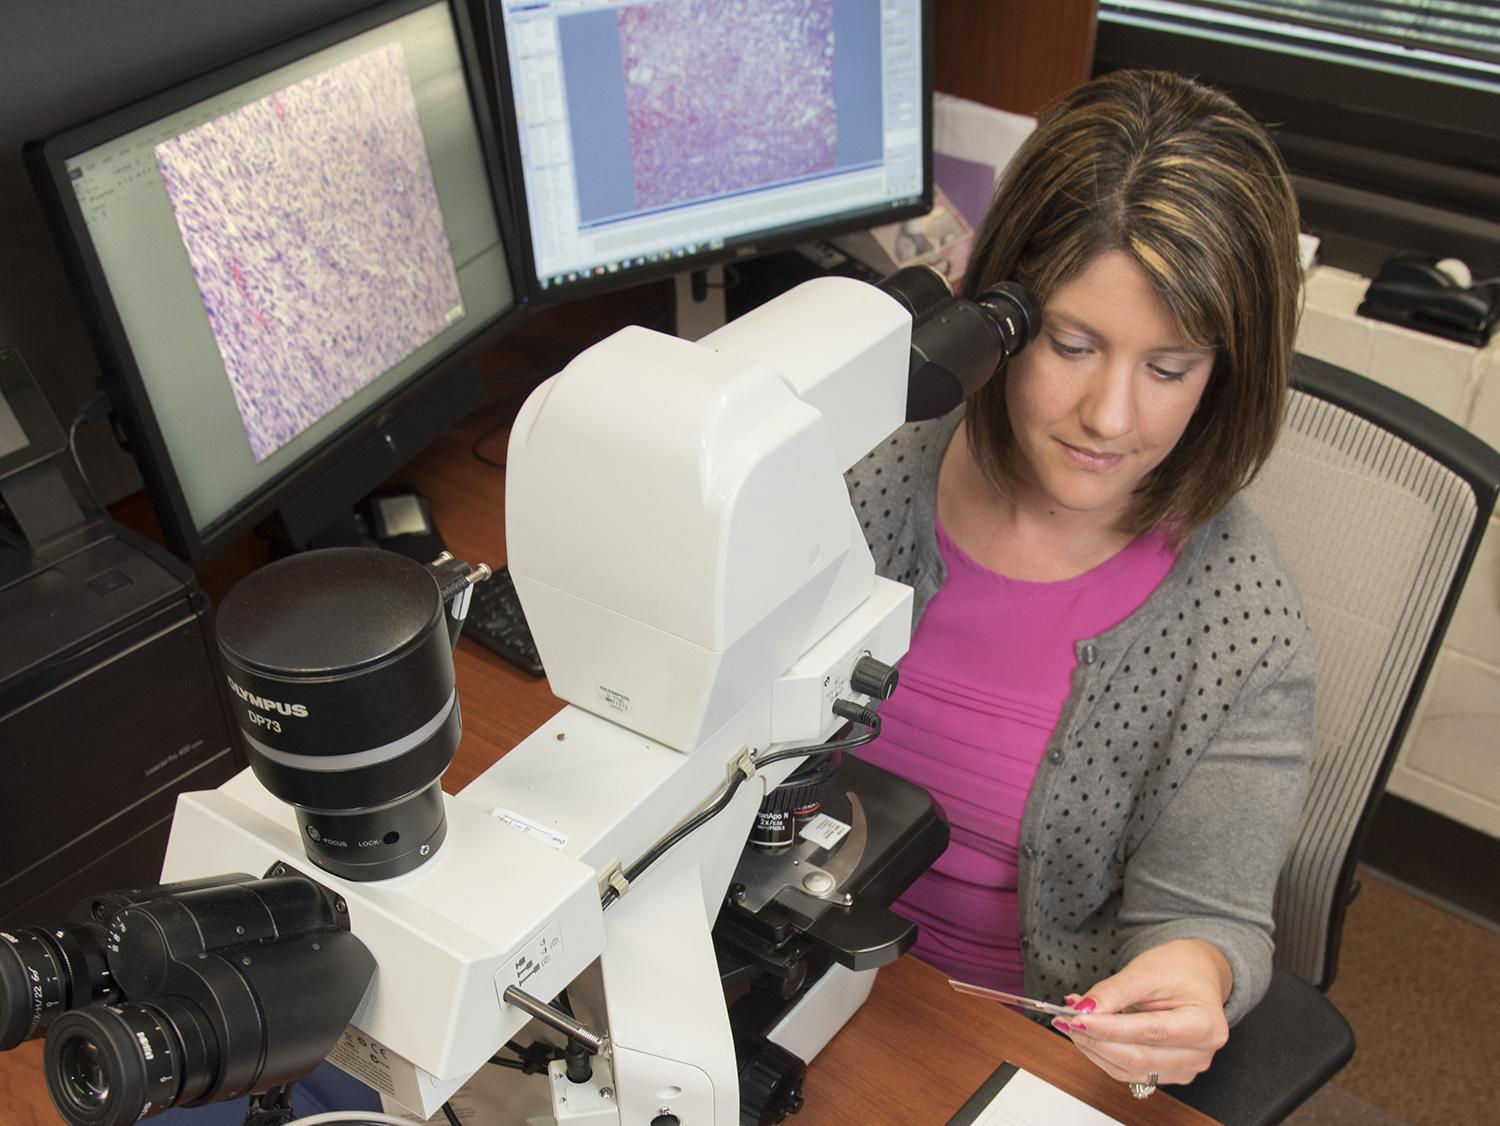 Dr. Alicia Olivier, an assistant professor in the Mississippi State University College of Veterinary Medicine, prepares to view a histology slide from a necropsy under a microscope. MSU offers this service to help determine causes of death for animals. (Photo by MSU-CVM/Tom Thompson)